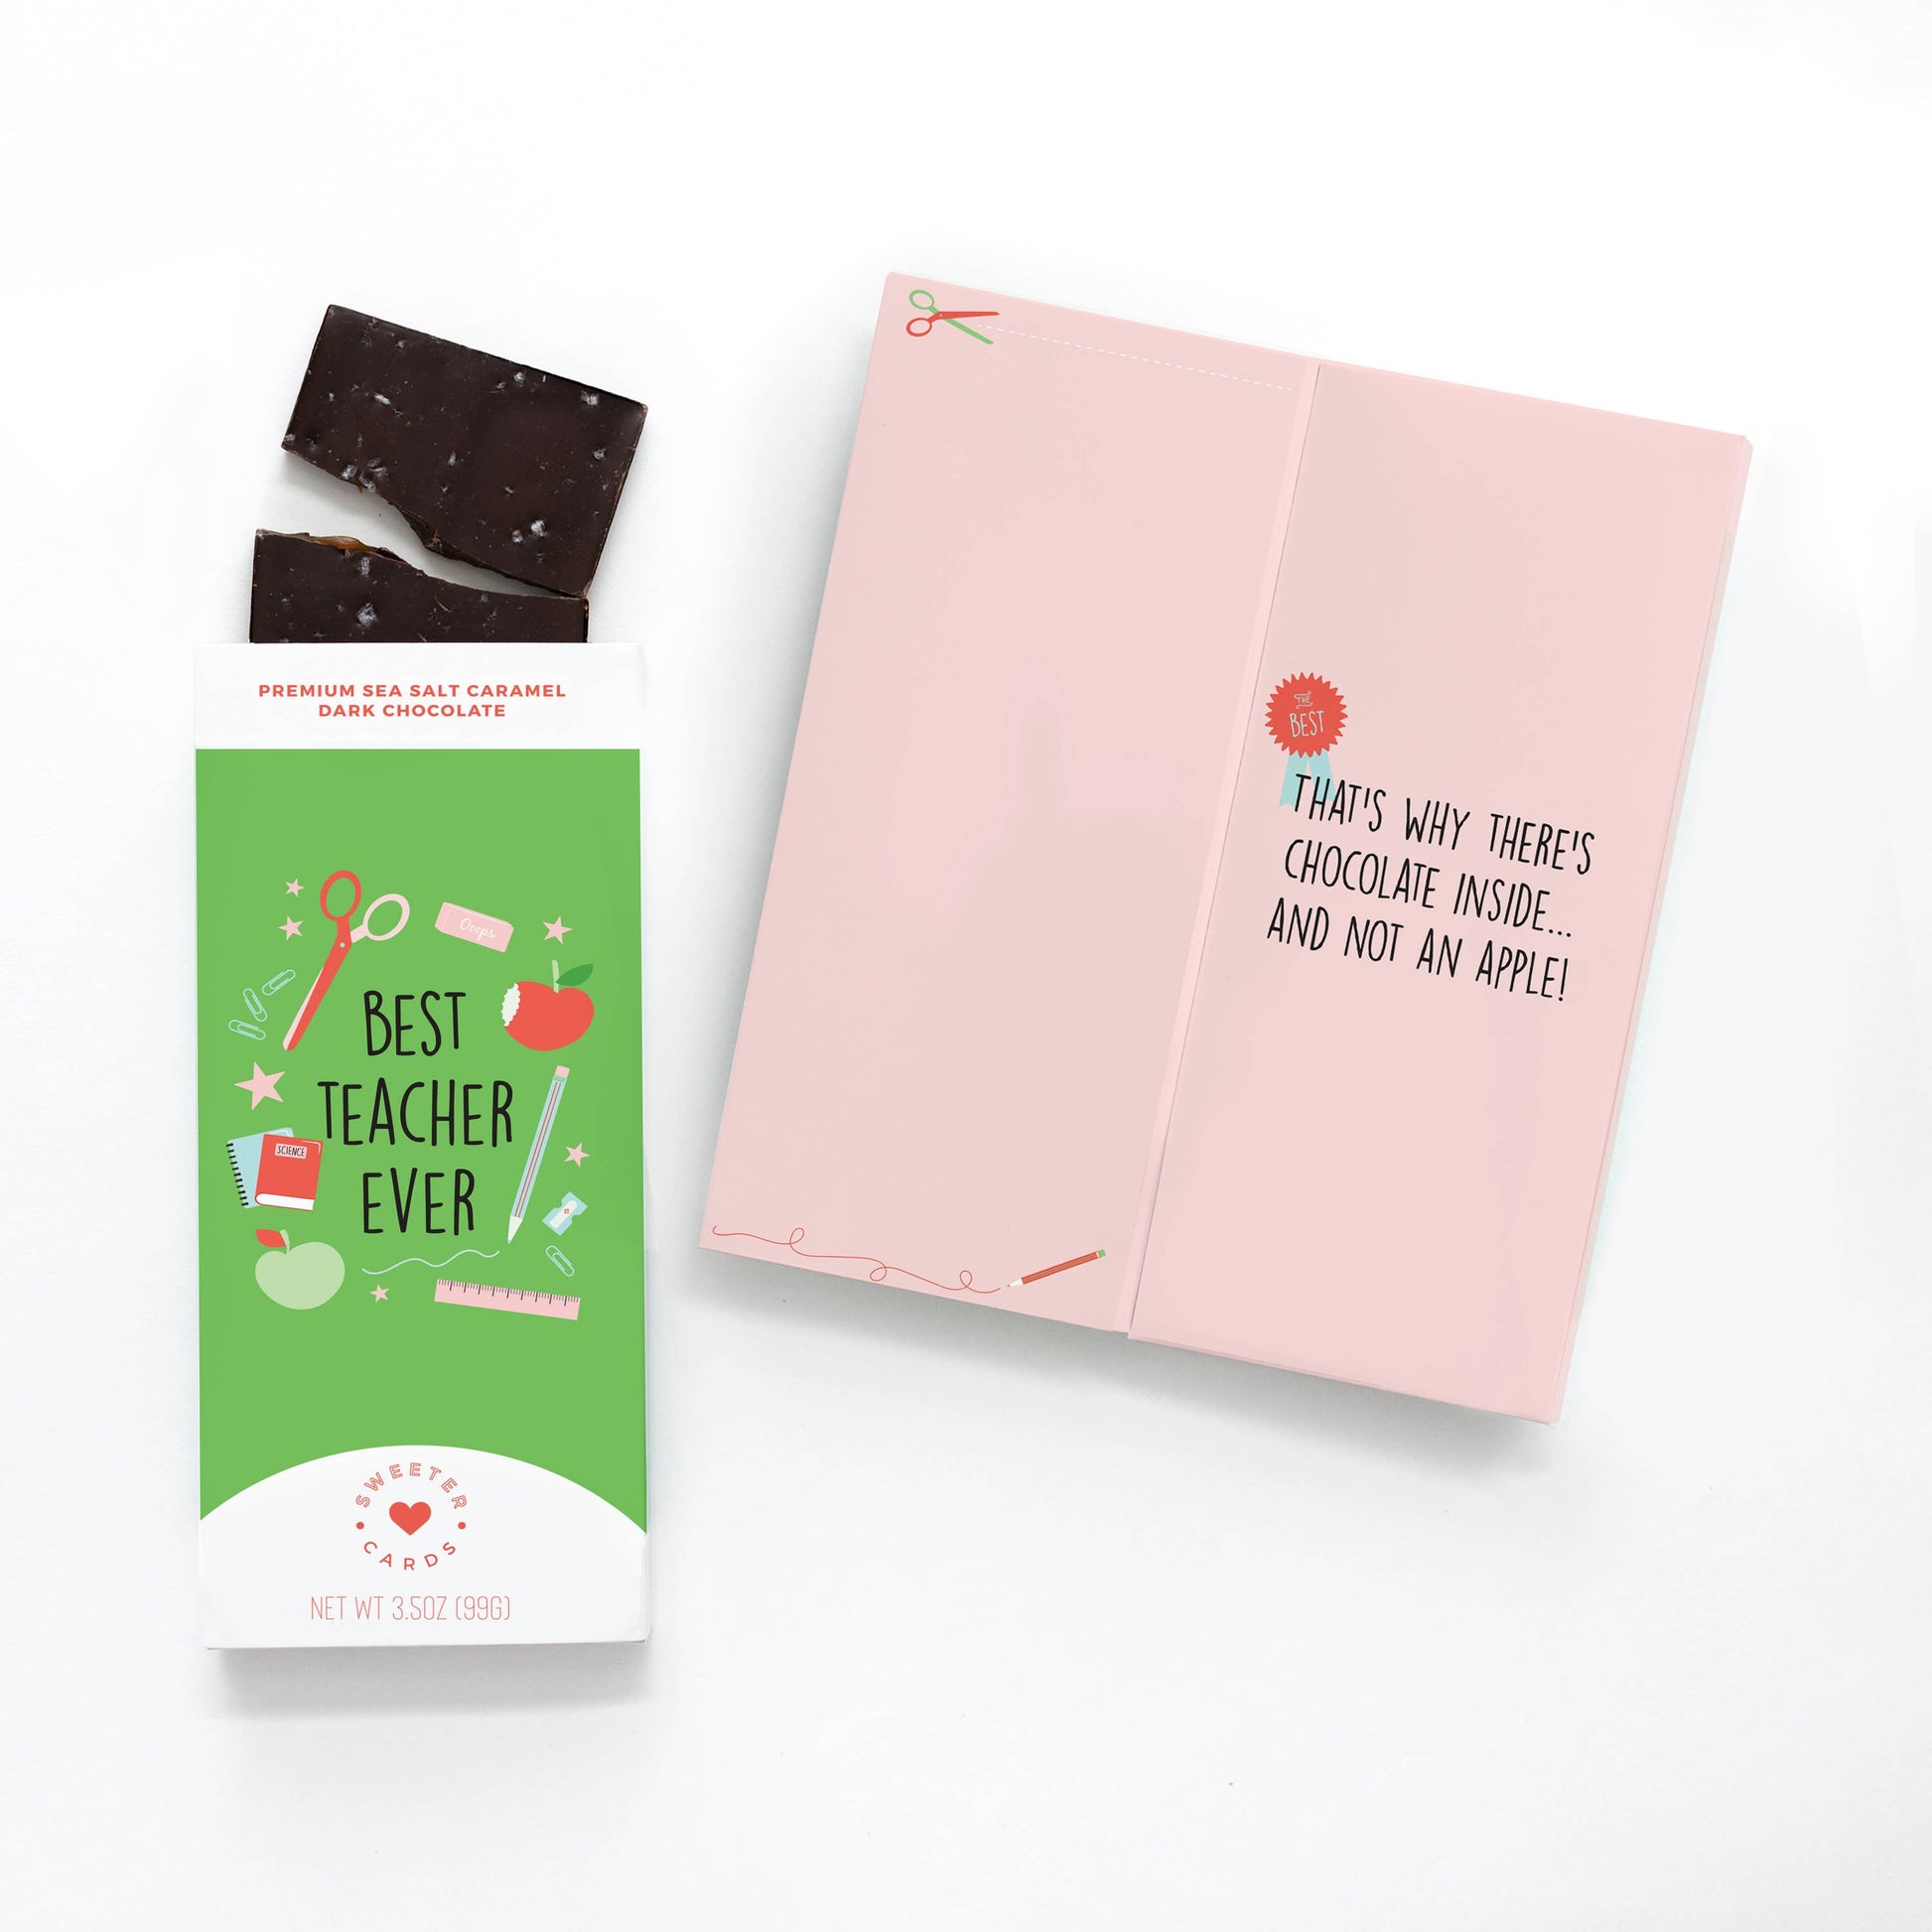 Sweeter Card - Best teacher ever Card with Fair trade Certified Chocolate inside  Sweeter Cards Chocolate Bar + Greeting Card in ONE!   -better made easy-eco-friendly-sustainable-gifting